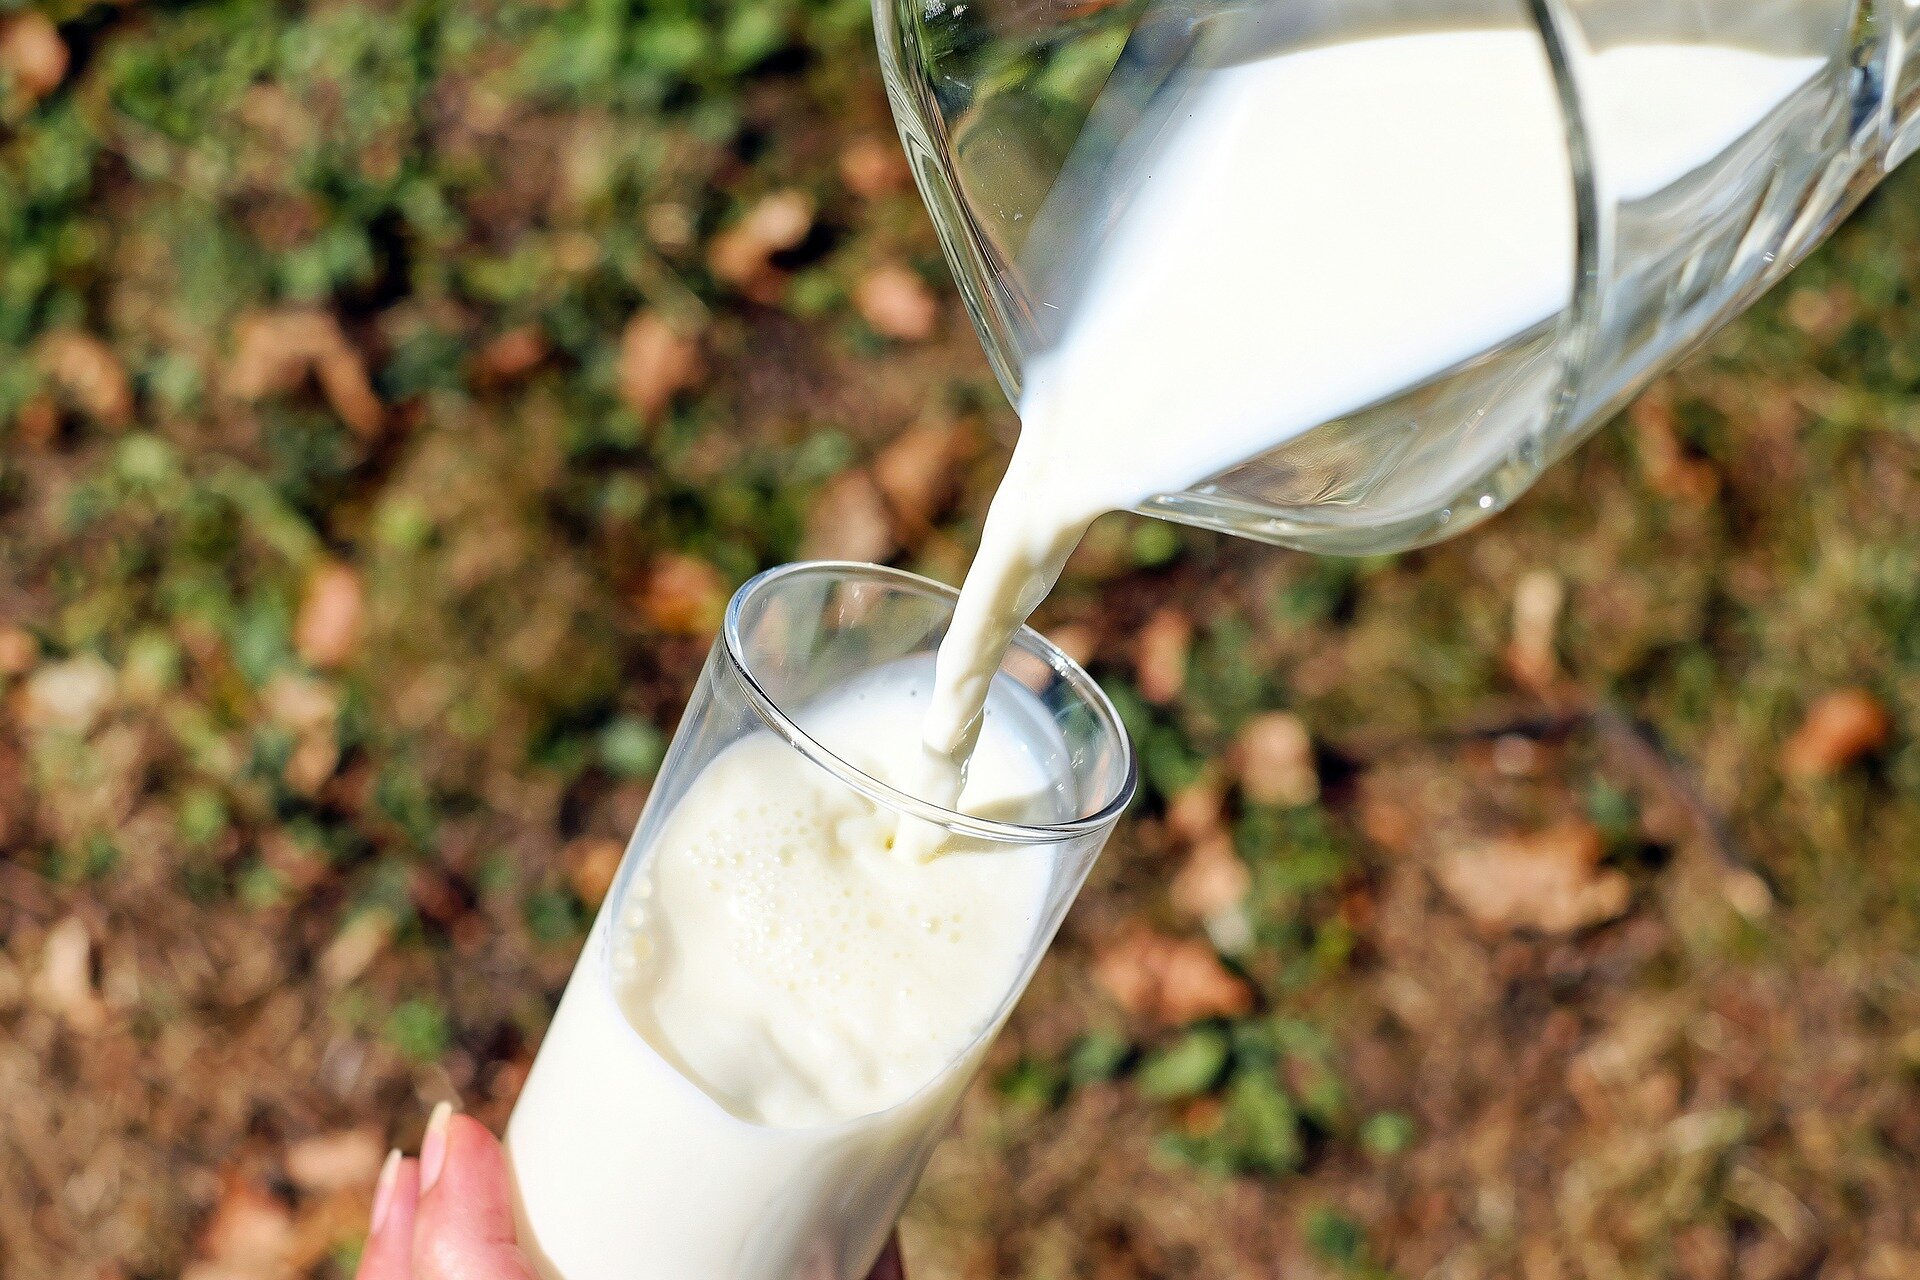 Will cell-based milk change the dairy industry? This California lab could lead the way